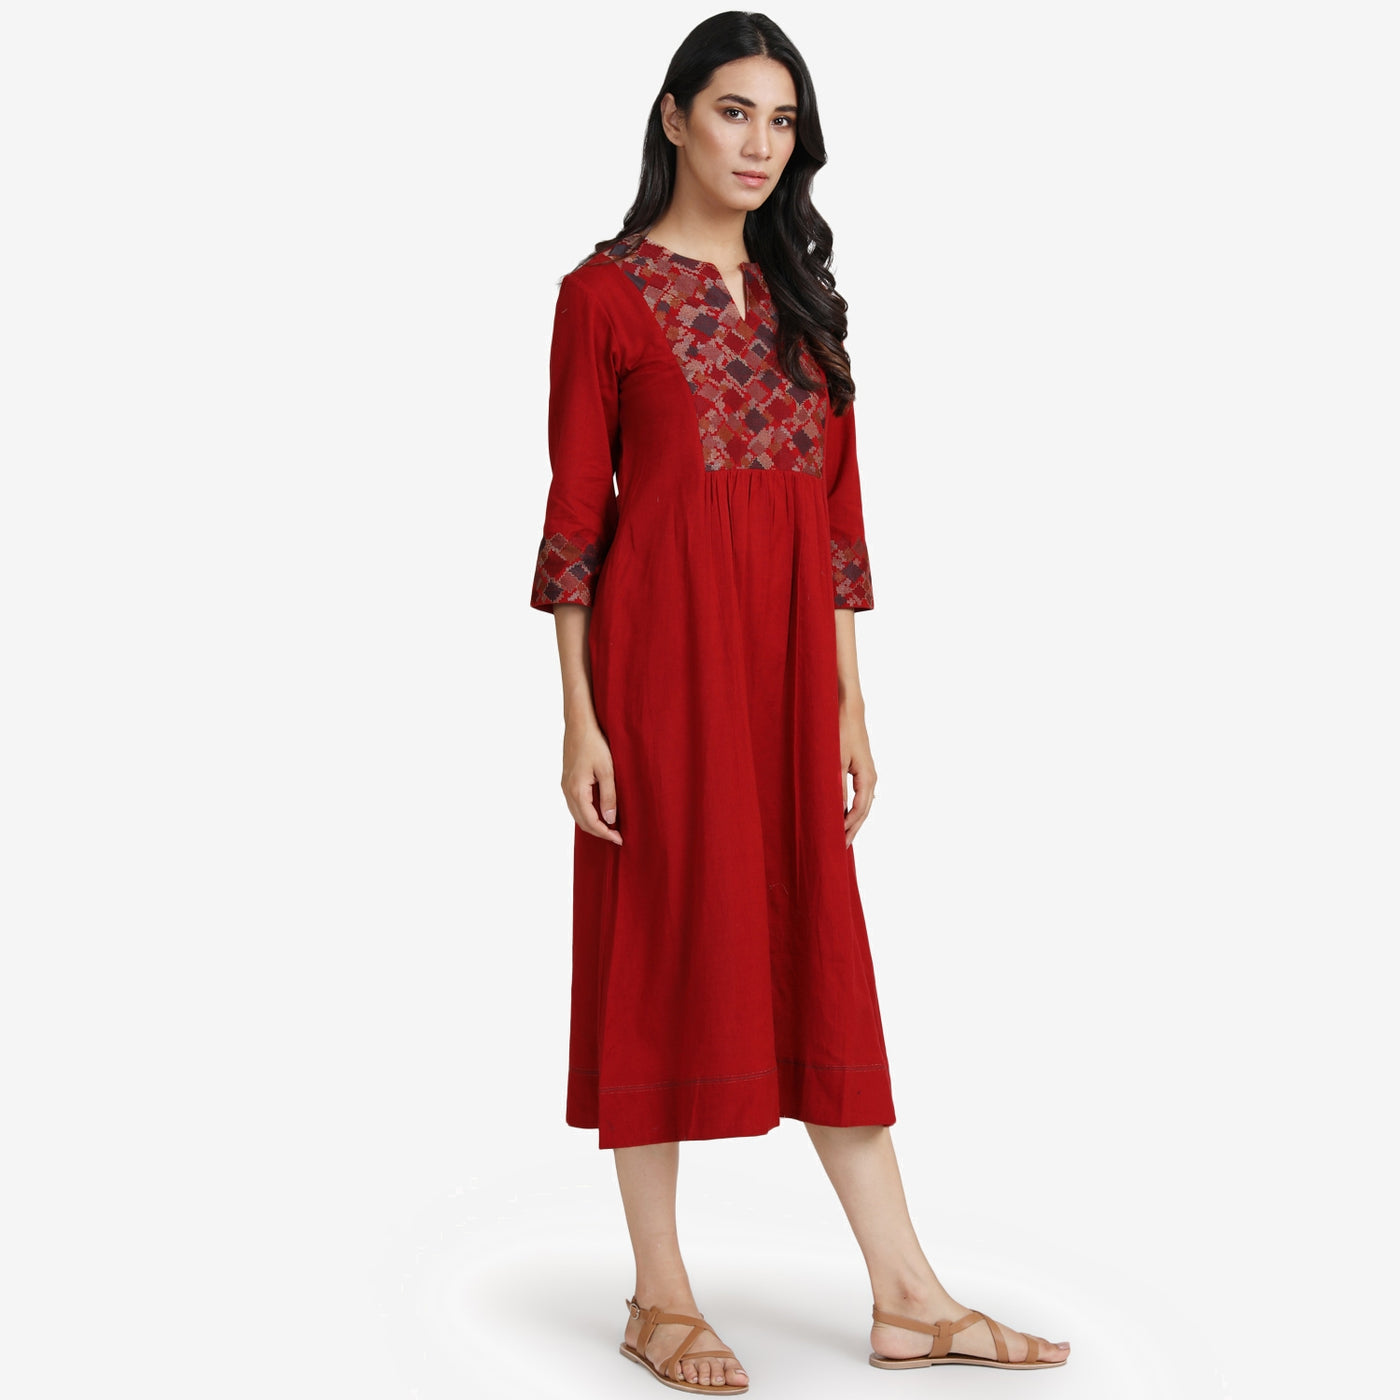 Red Embroidered Cotton linen Dress